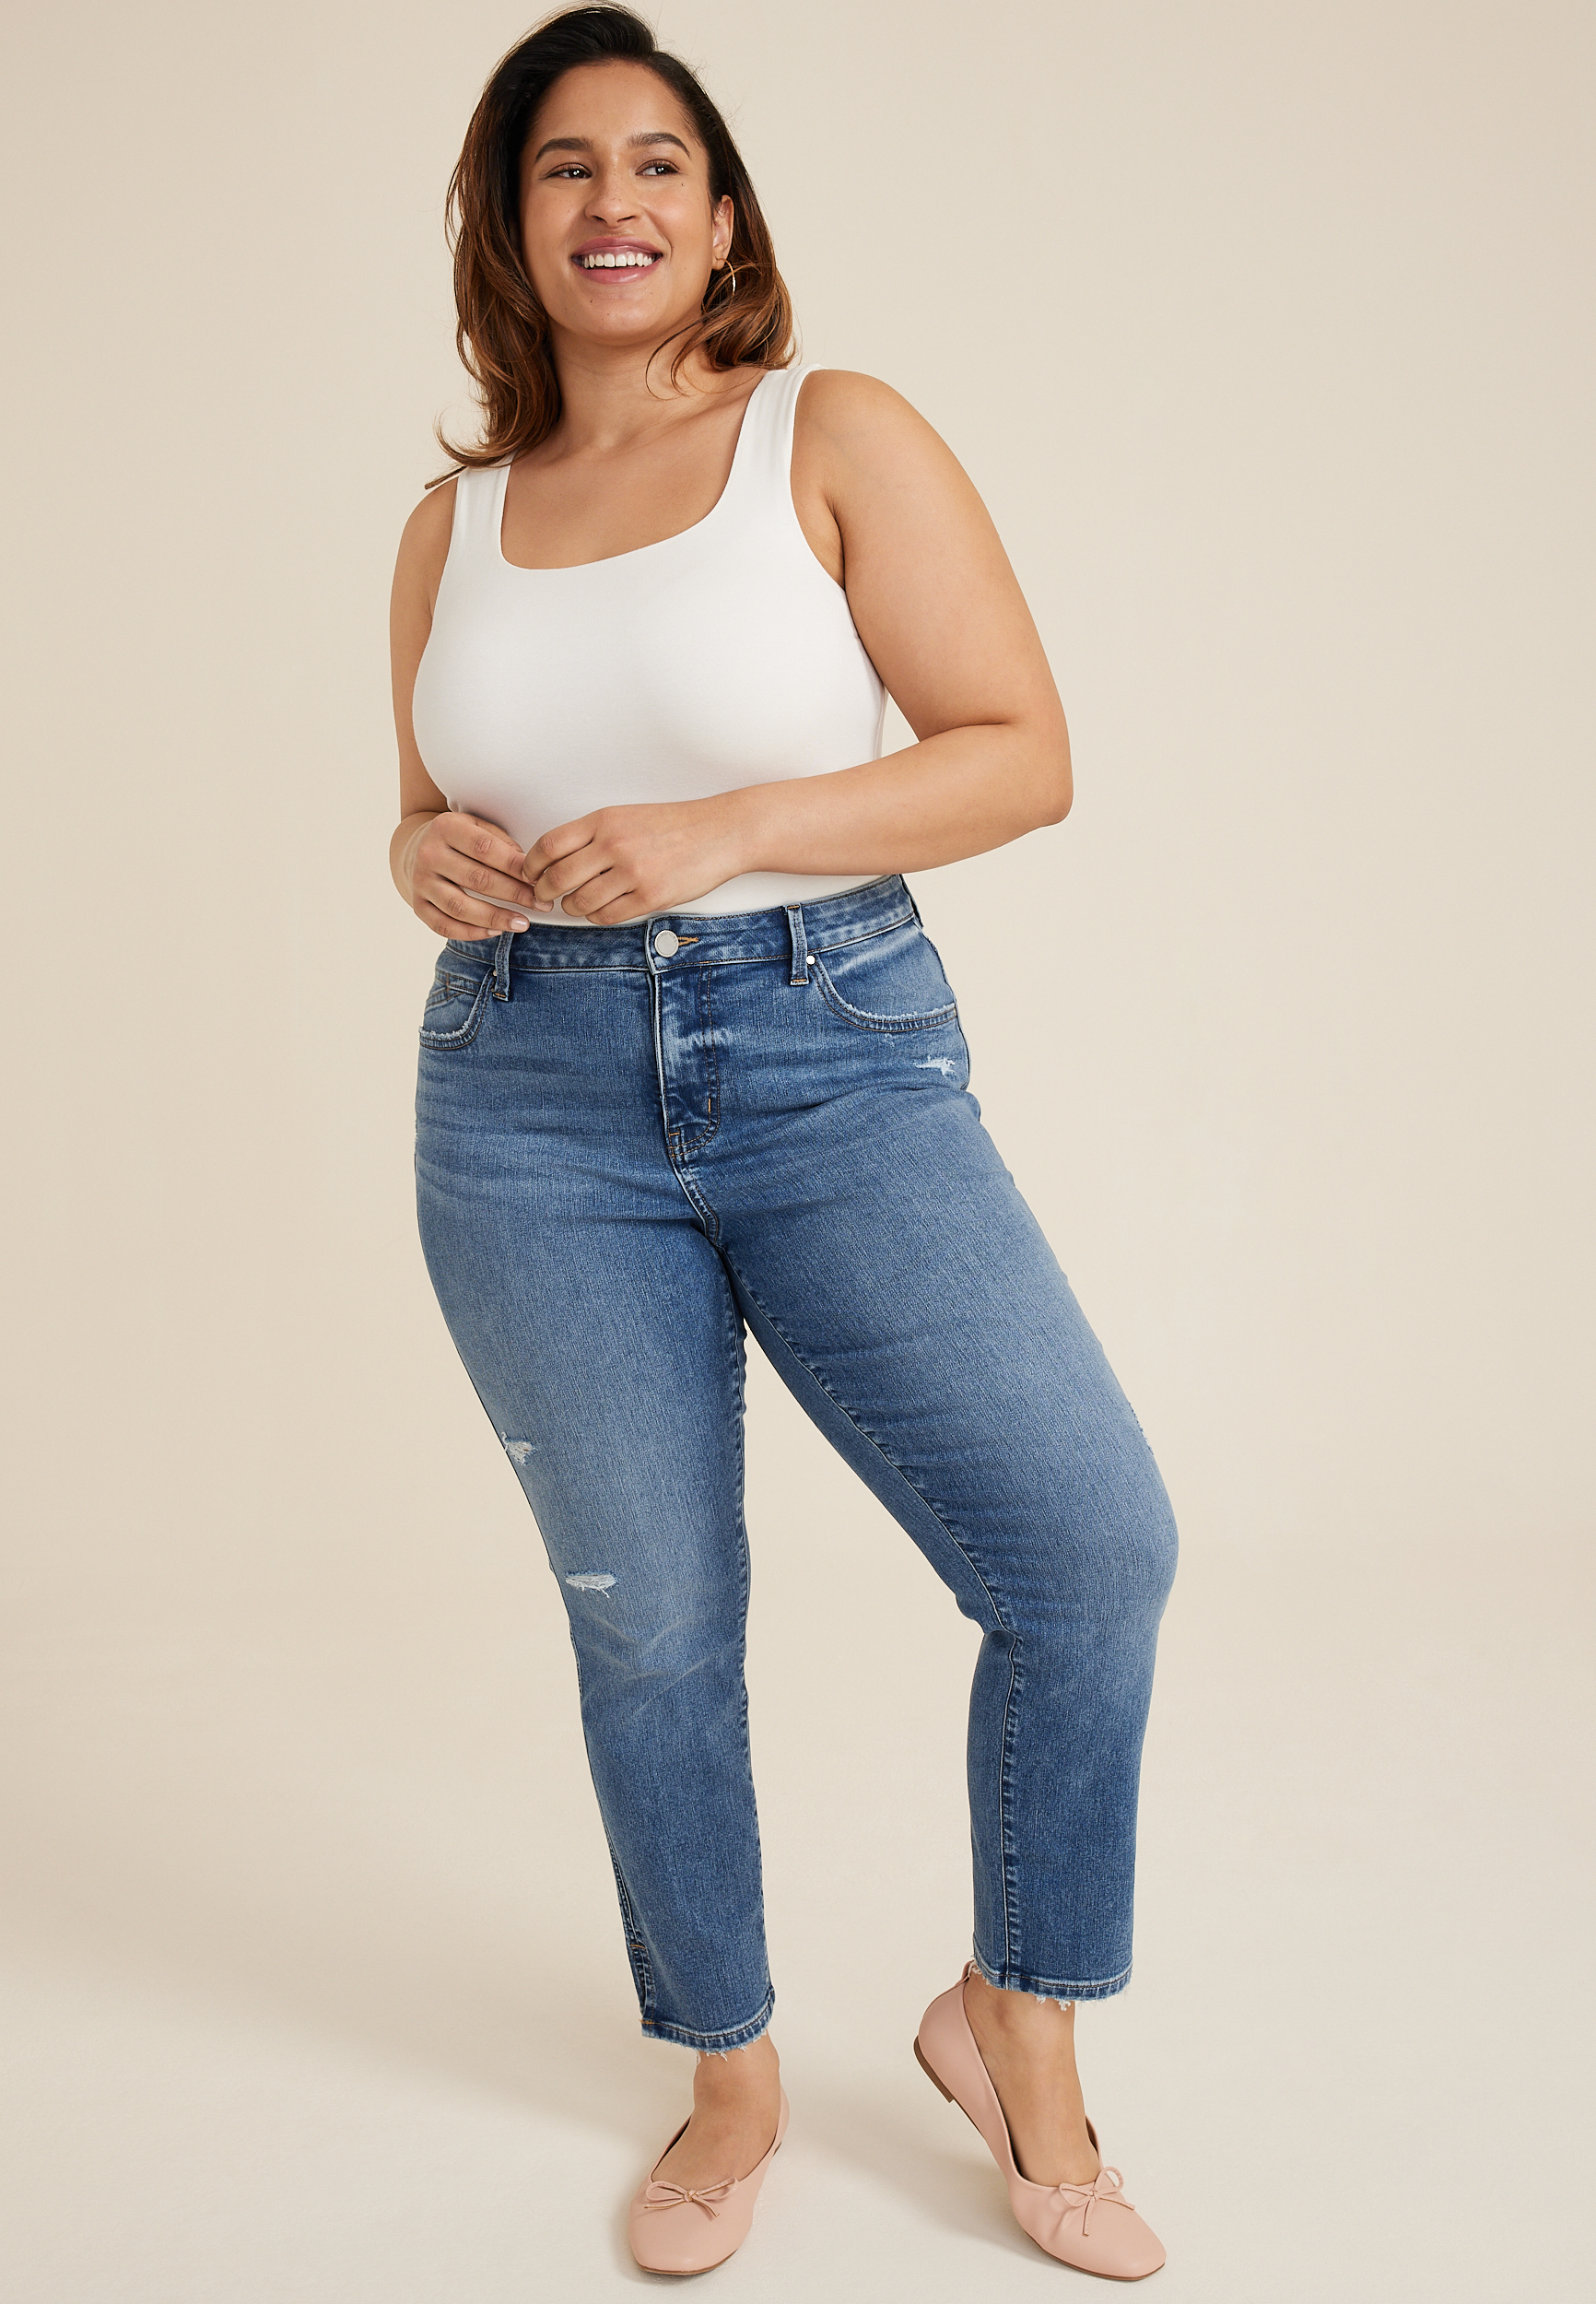 Plus m jeans by maurices™ Everflex™ Curvy High Rise Slim Straight Ankle Jean